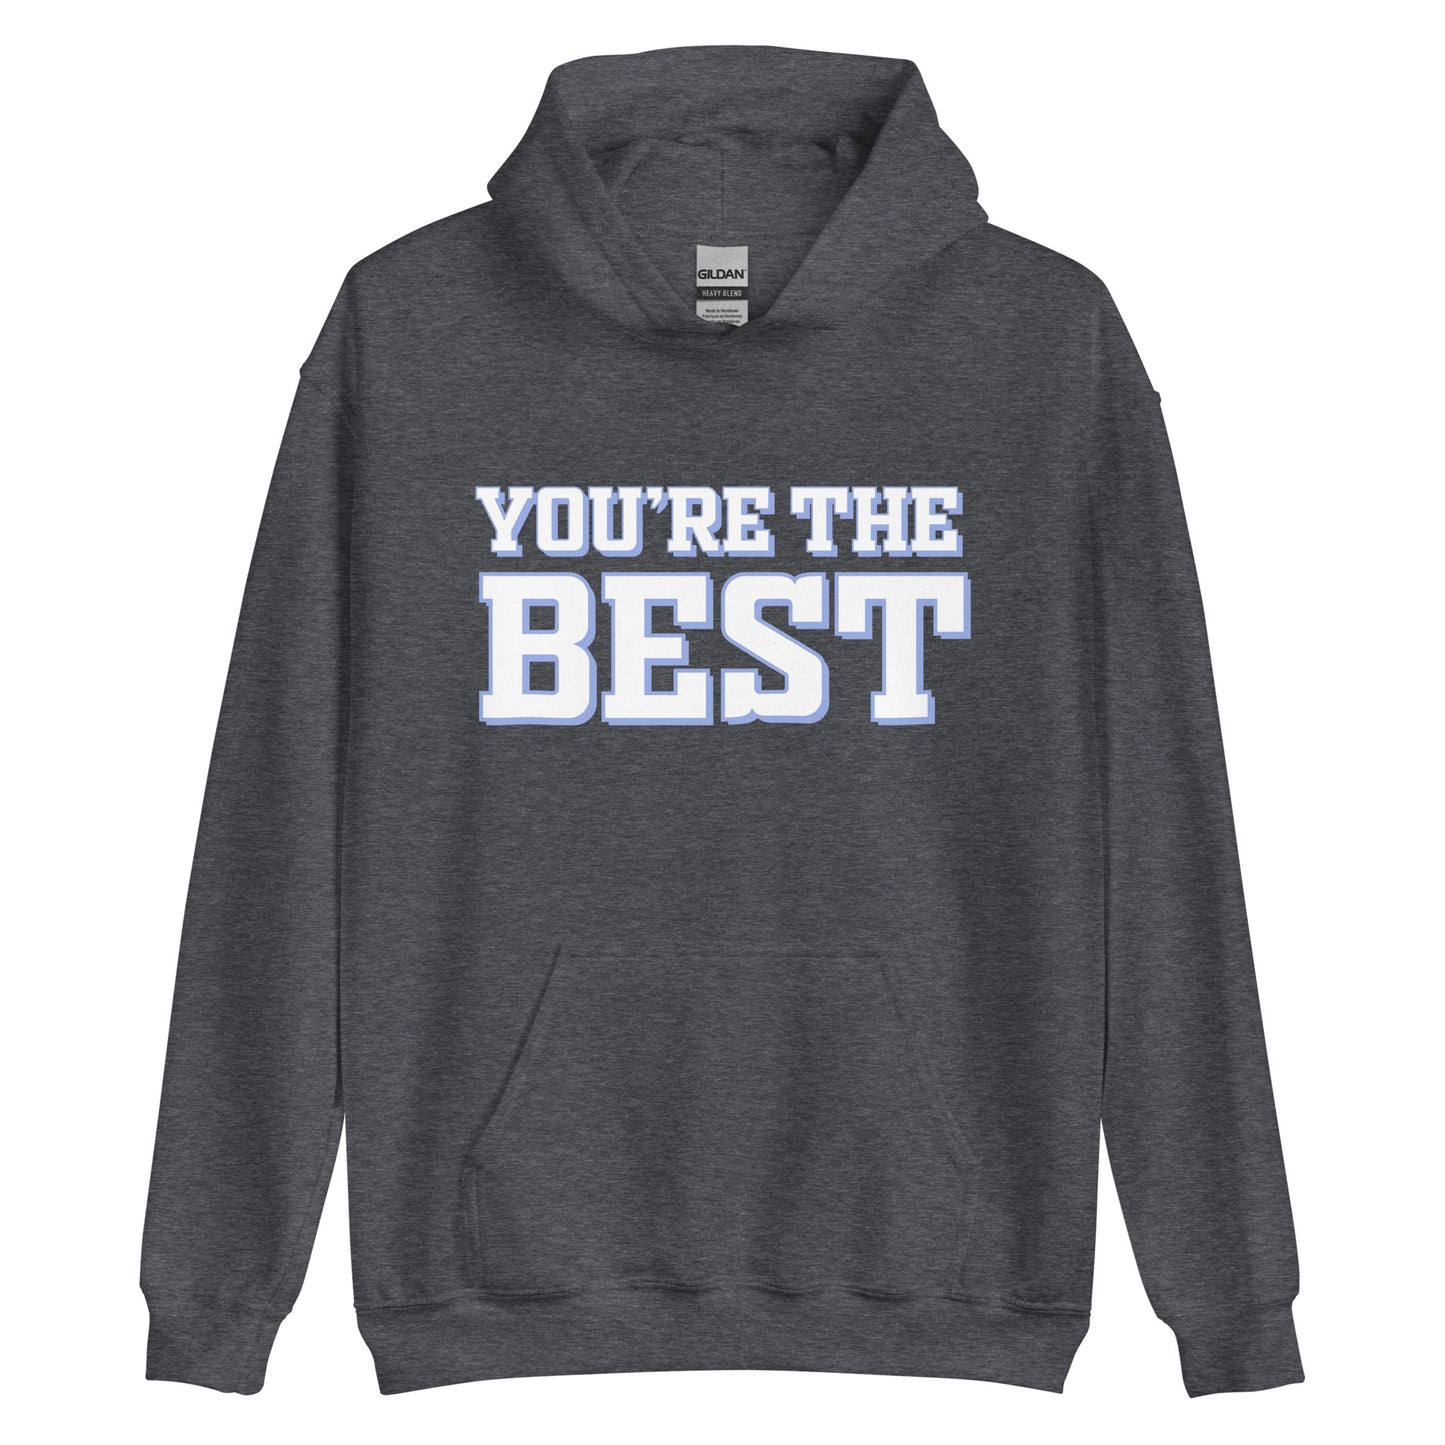 You're the best hoodie